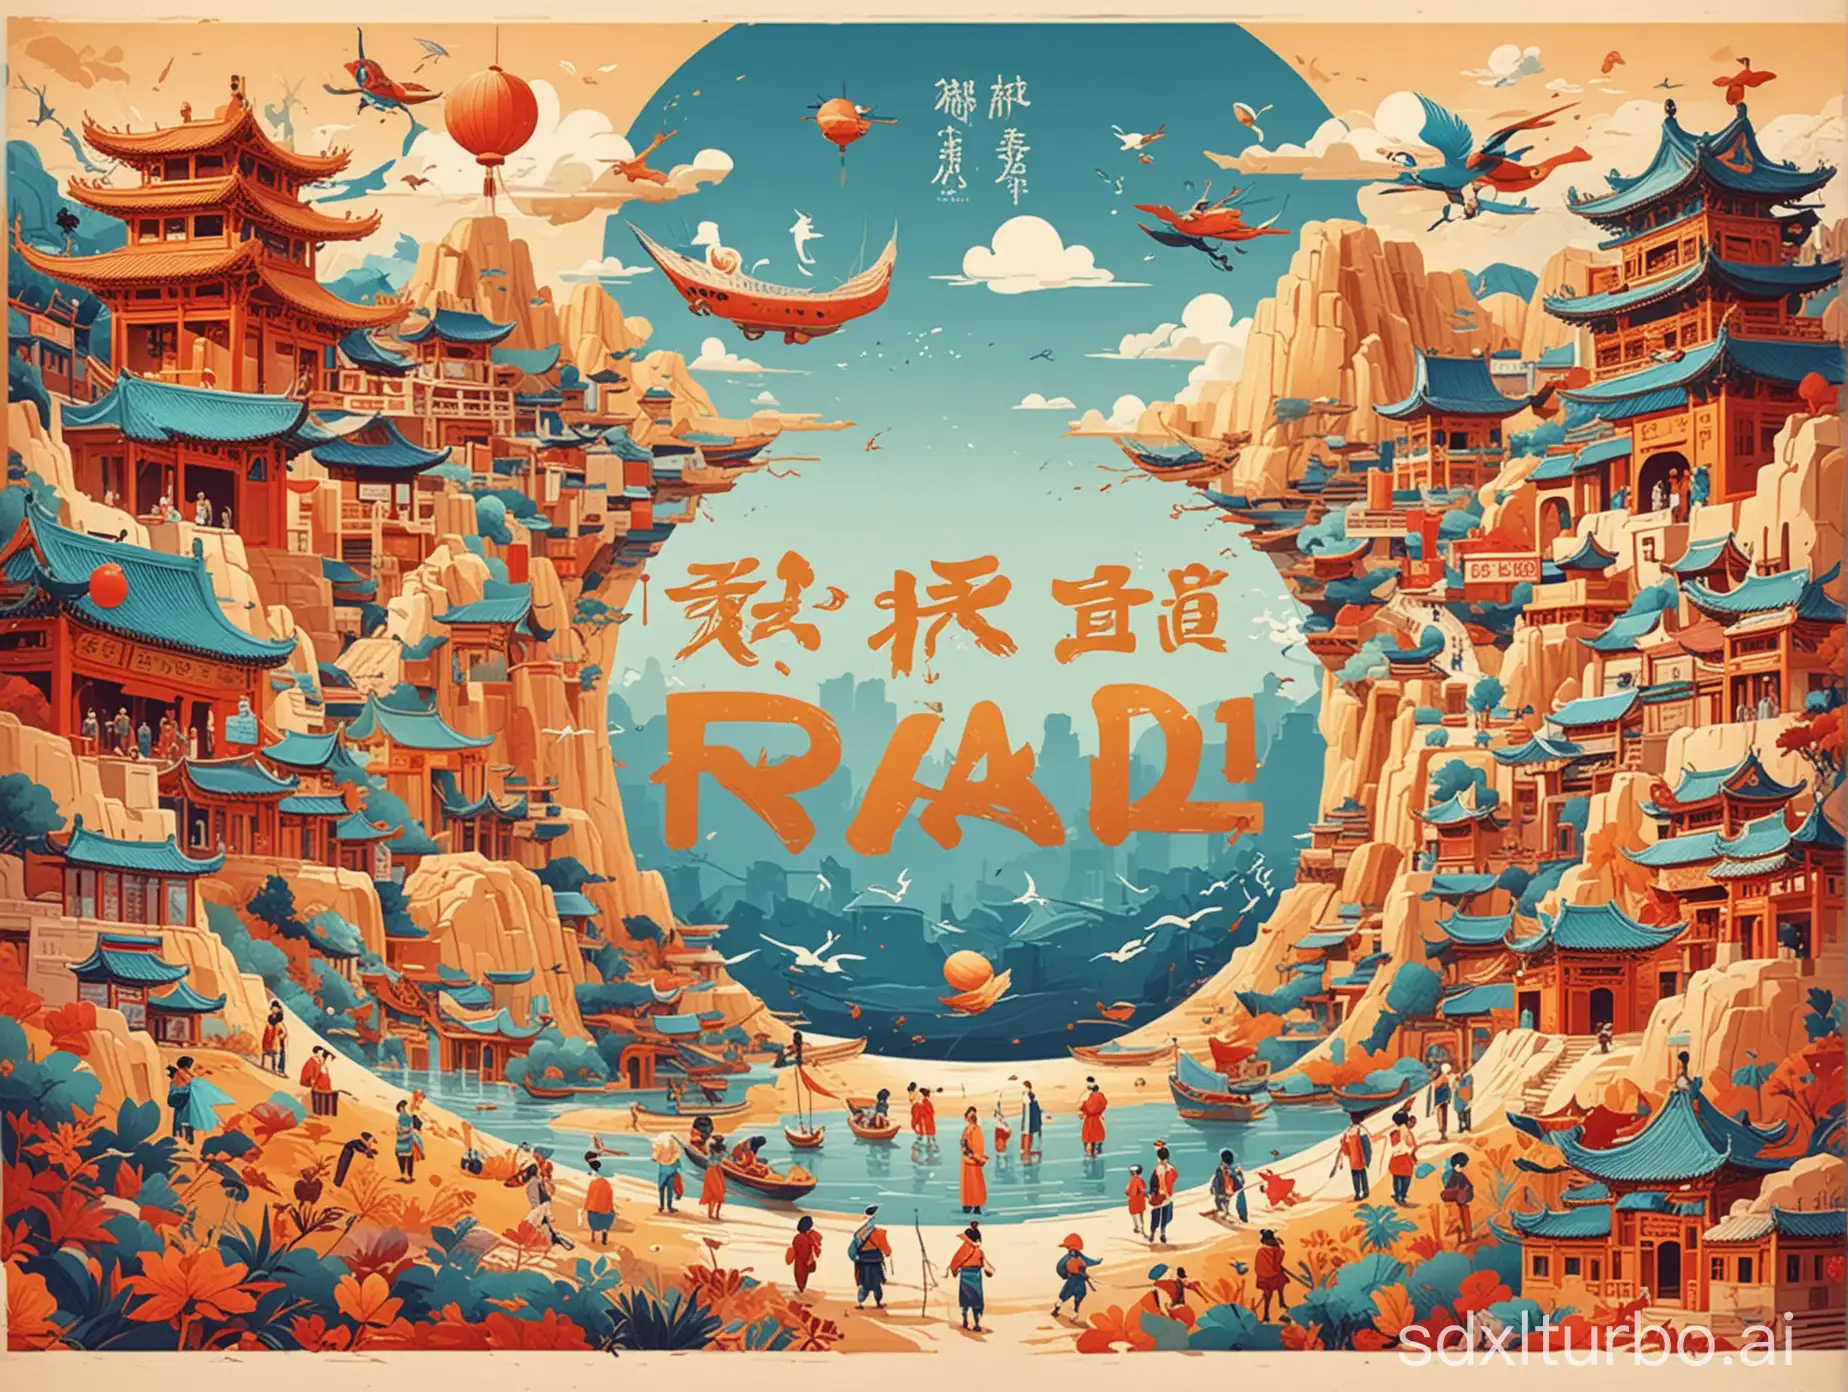 Belt and Road, science and technology, Chinese culture, harmony style, planar design, flat design, poster style, rich color palette, children's painting style